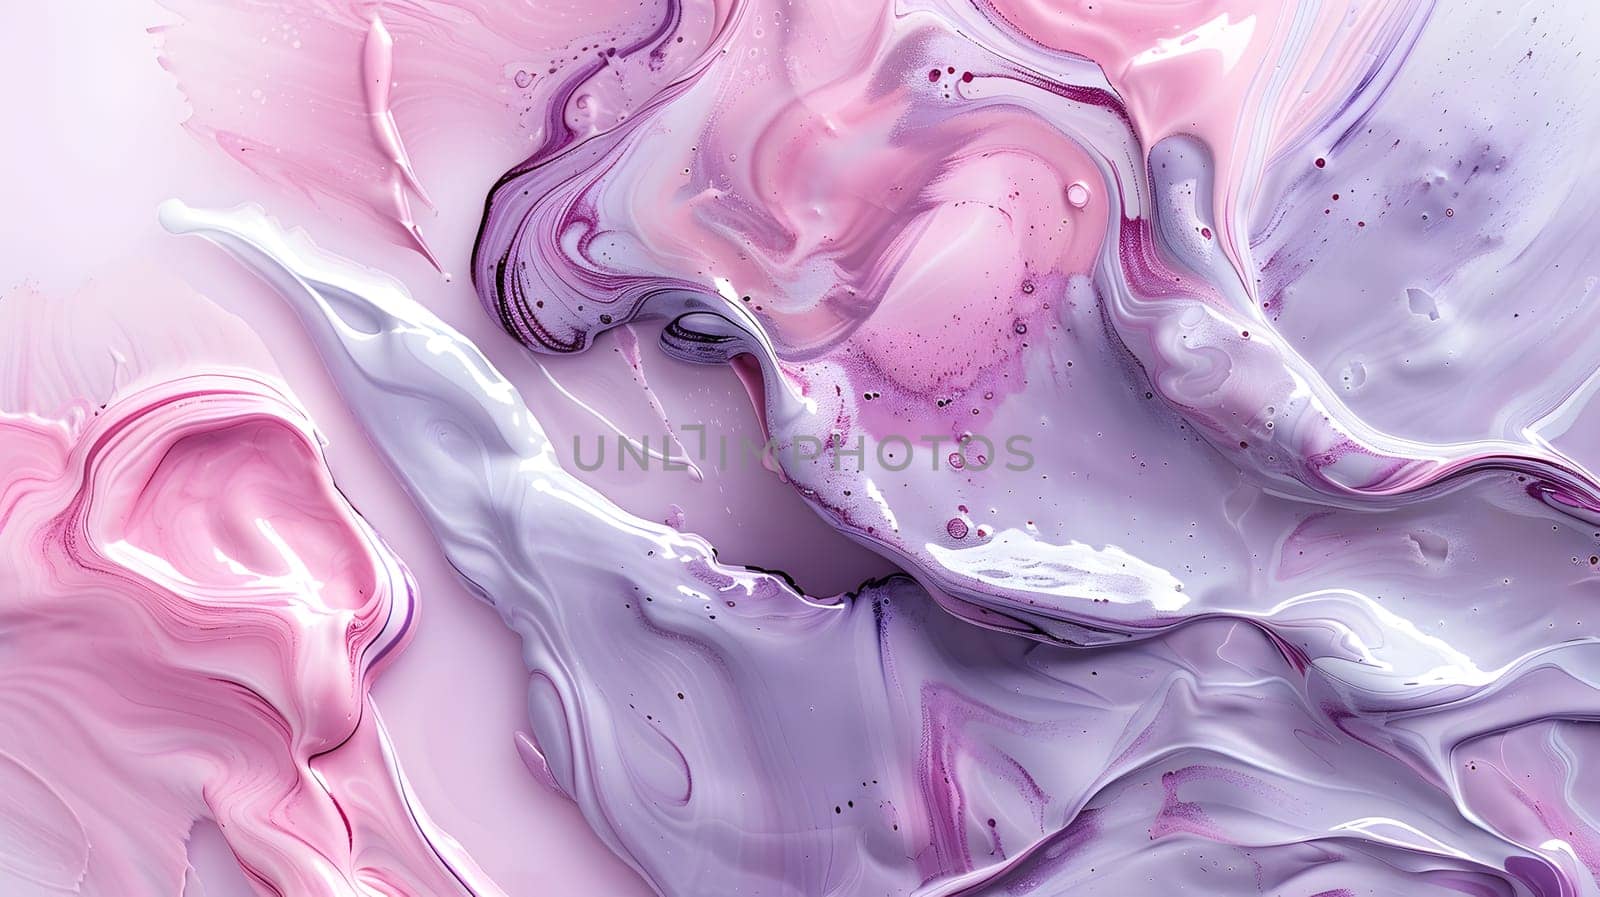 A detailed close up of a vibrant swirl of pink and purple paint, resembling a beautiful petal pattern. A mesmerizing artwork in shades of magenta and violet